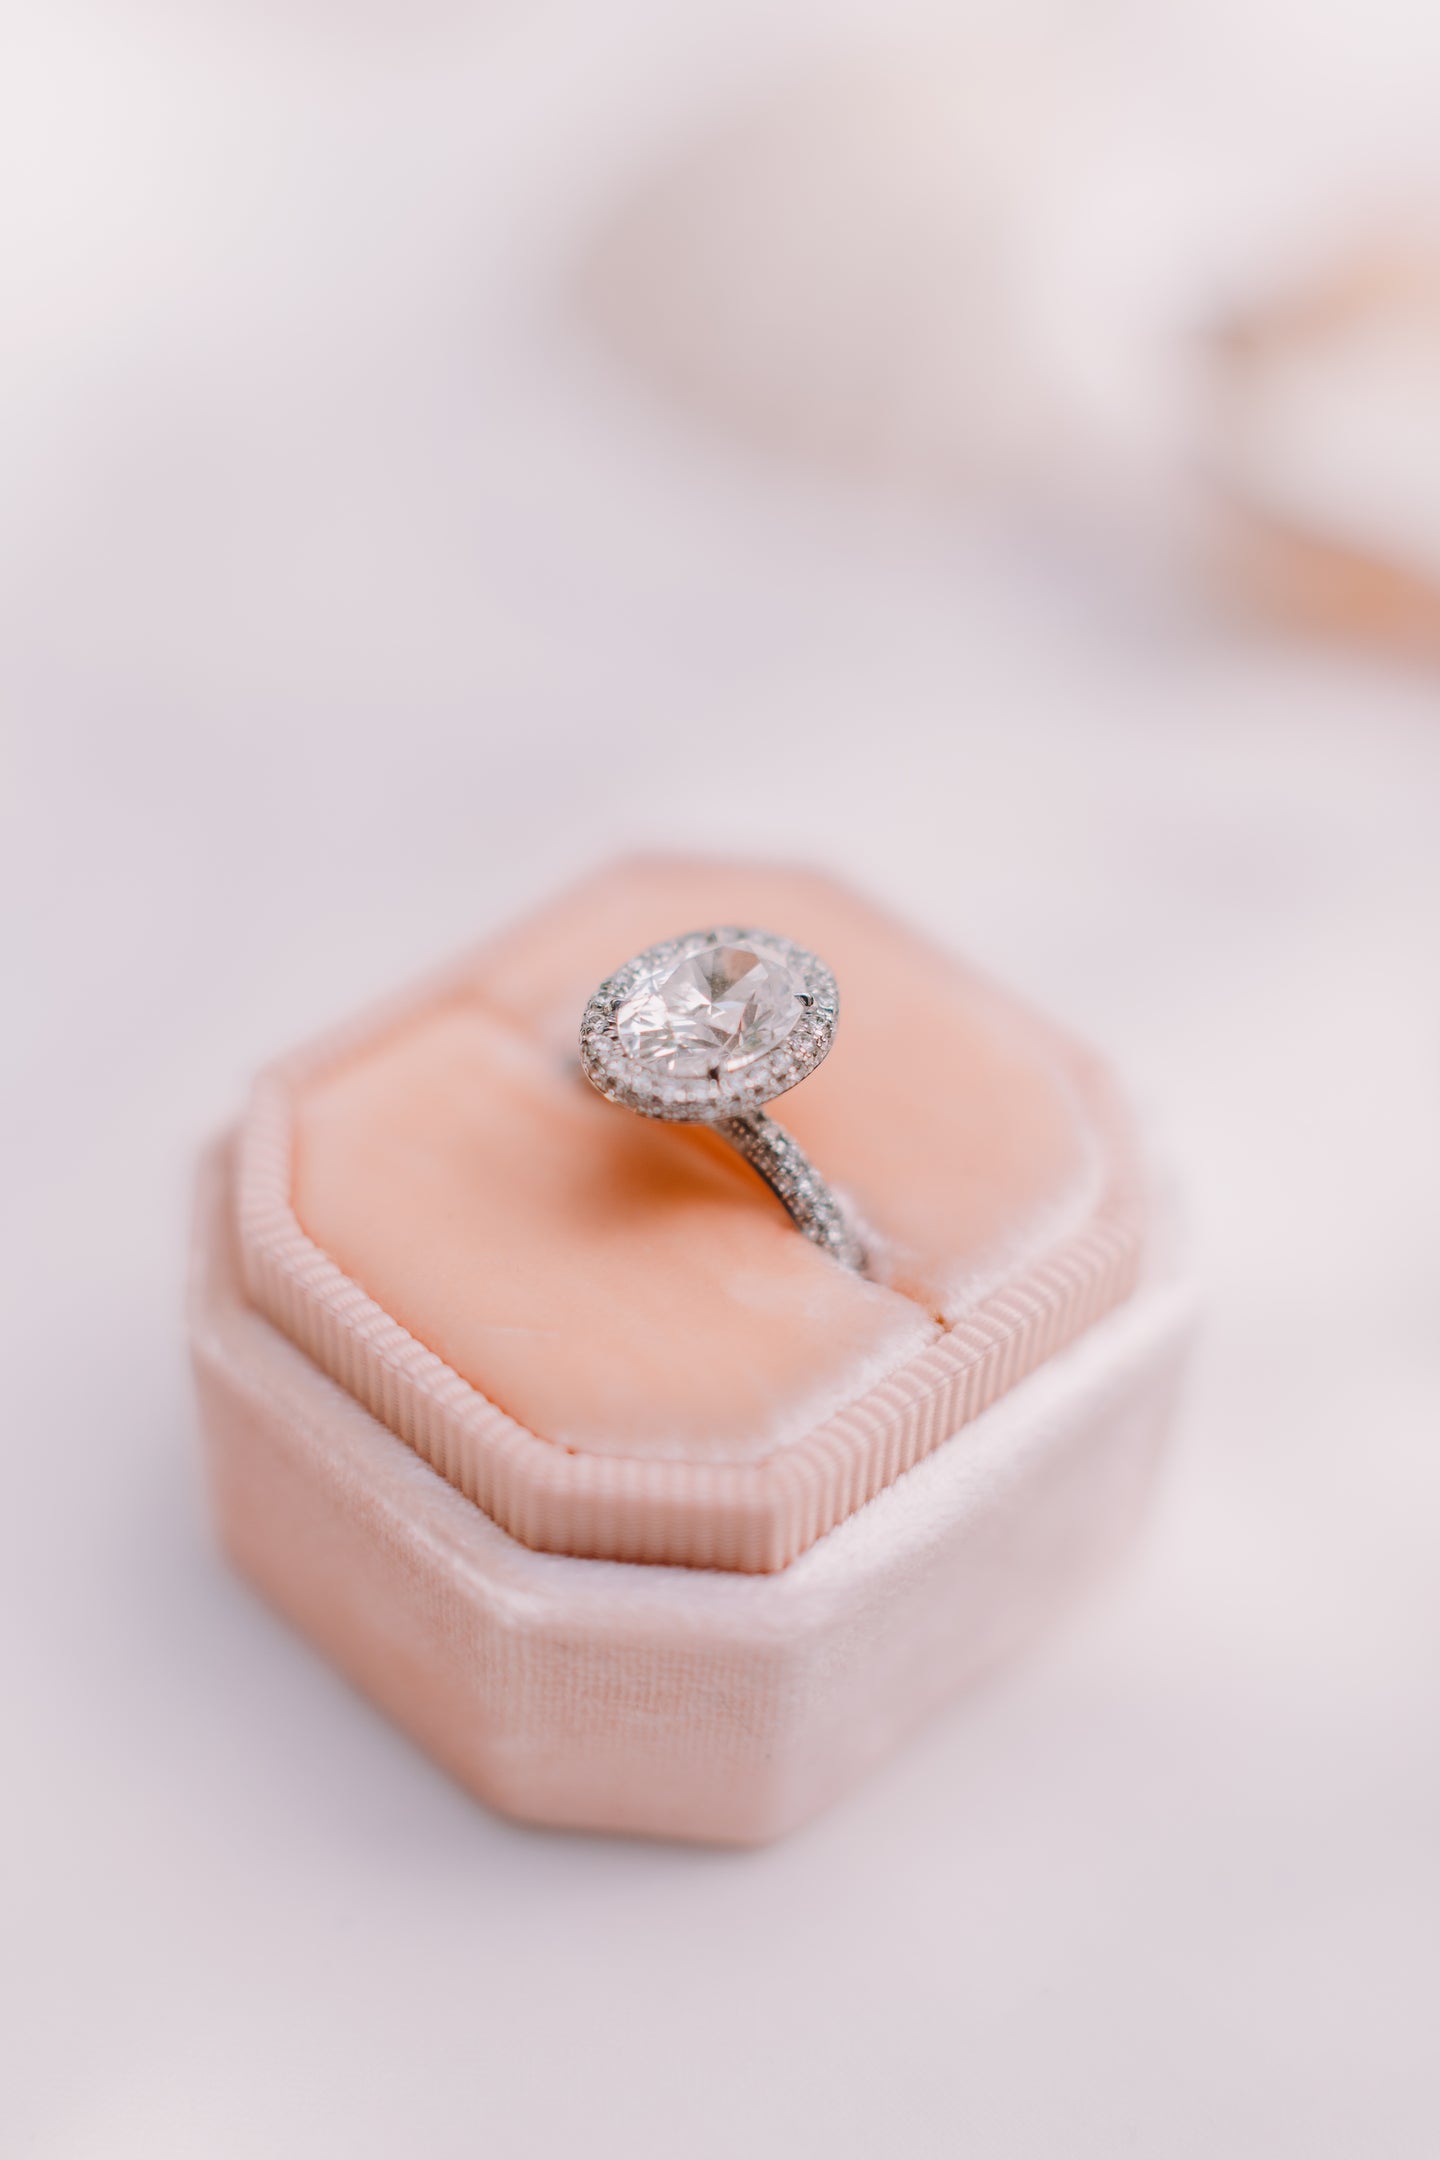 Create a Stunning and One-of-a-kind ring